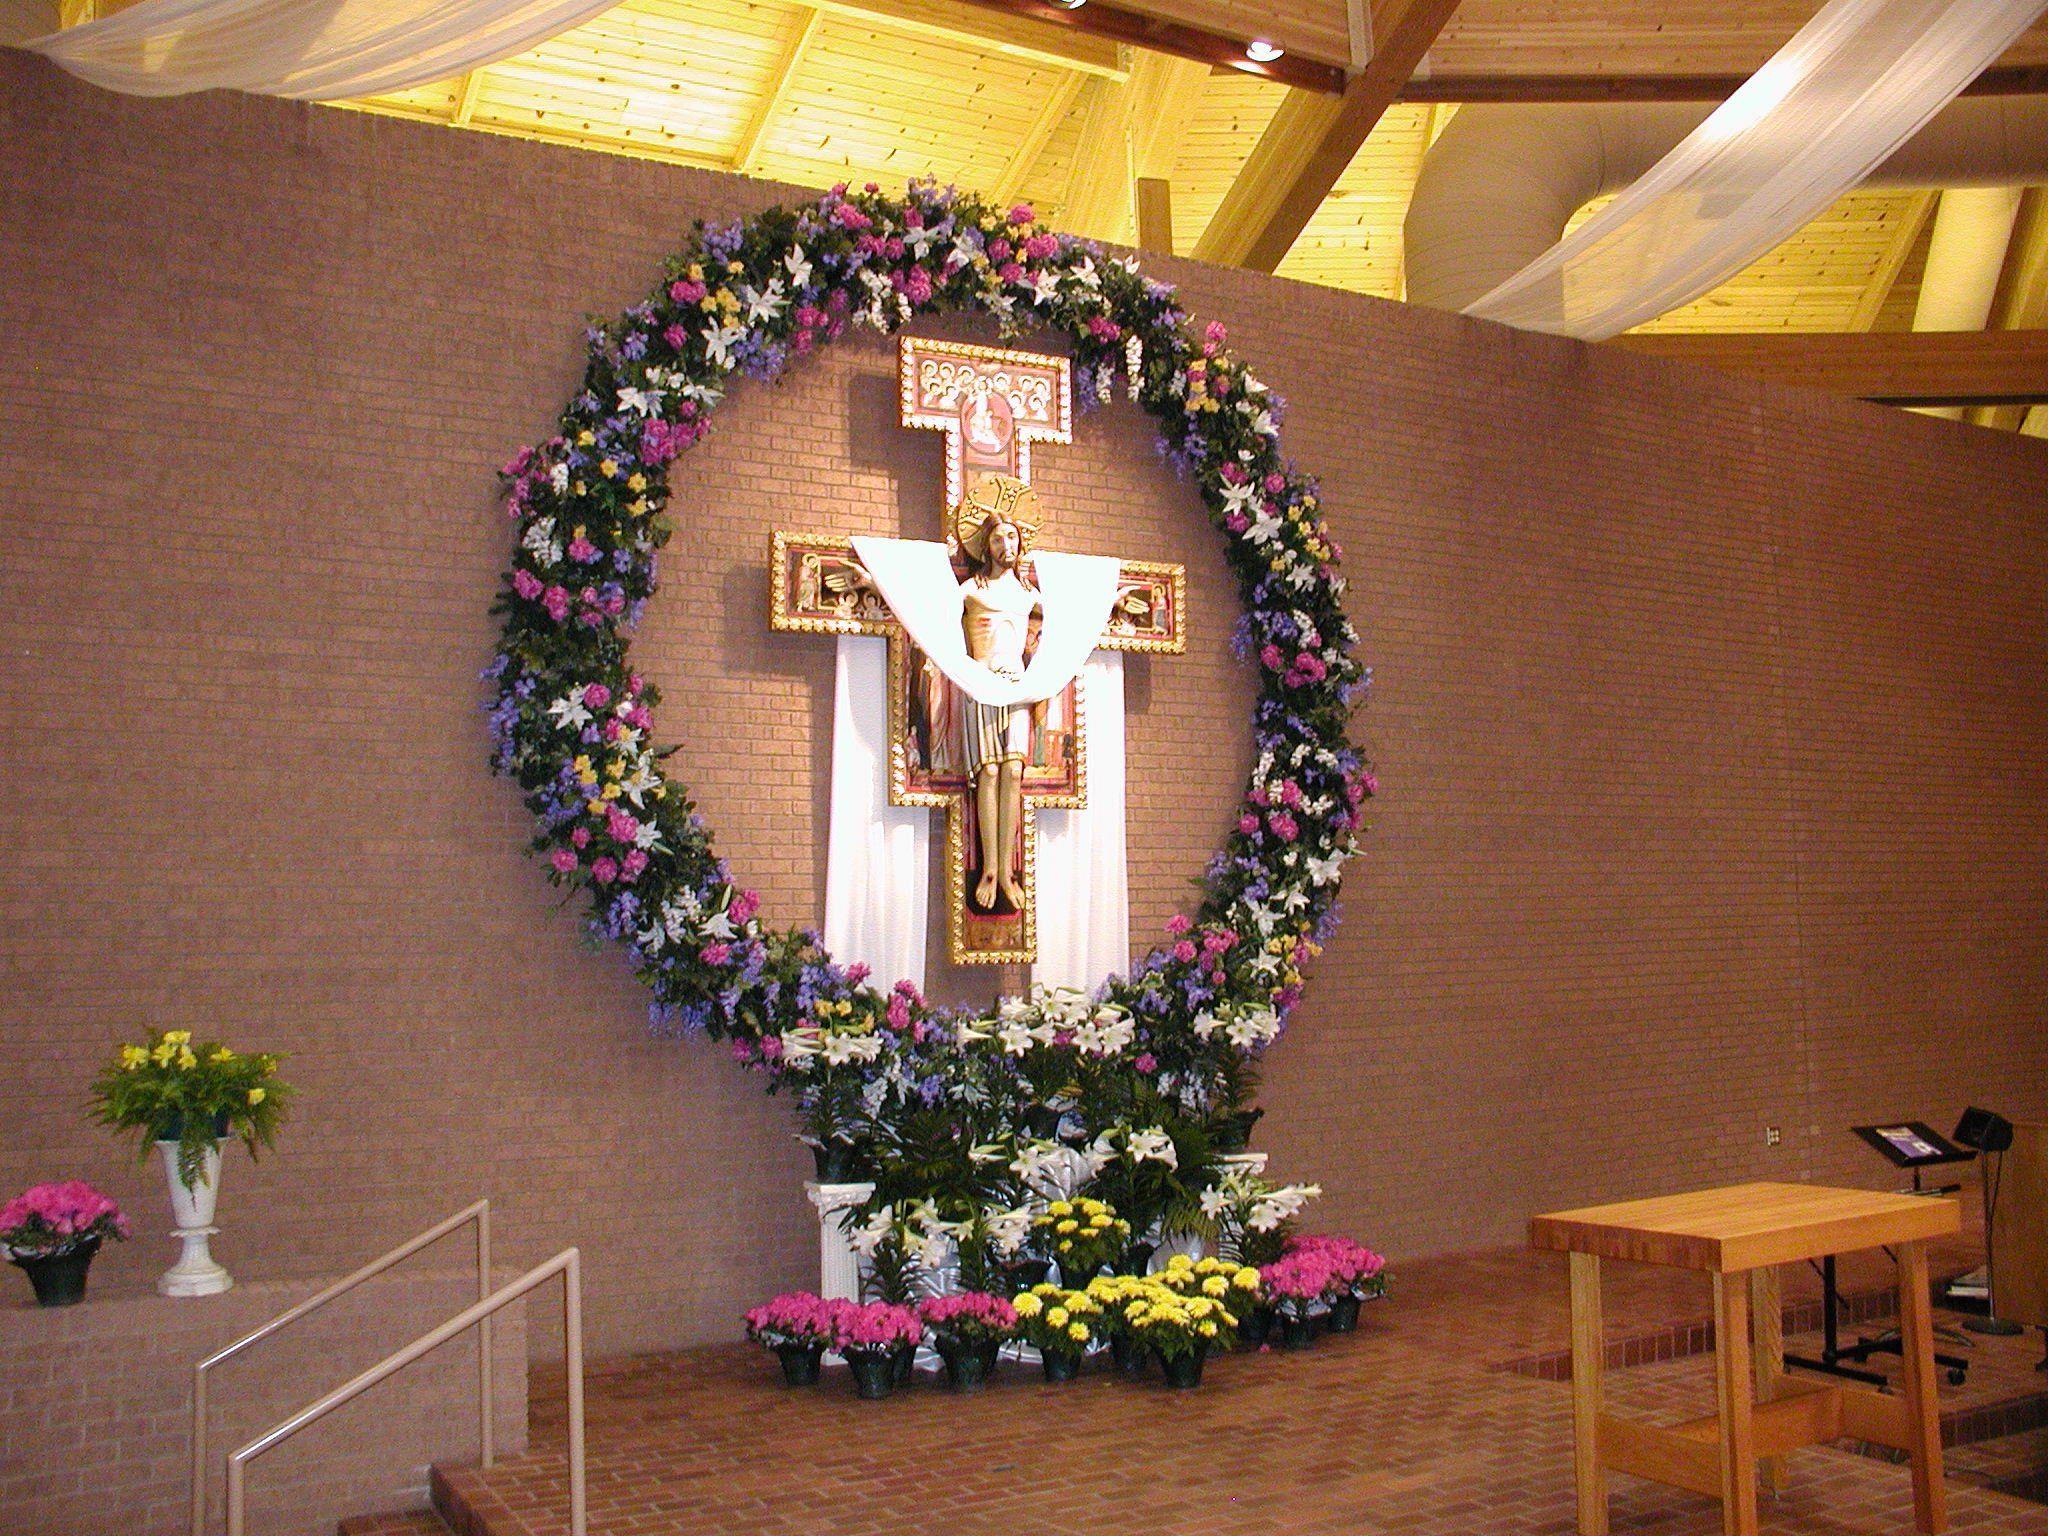 Ideas For Decorating Catholic Altar For Advent -   Decoration for the church.